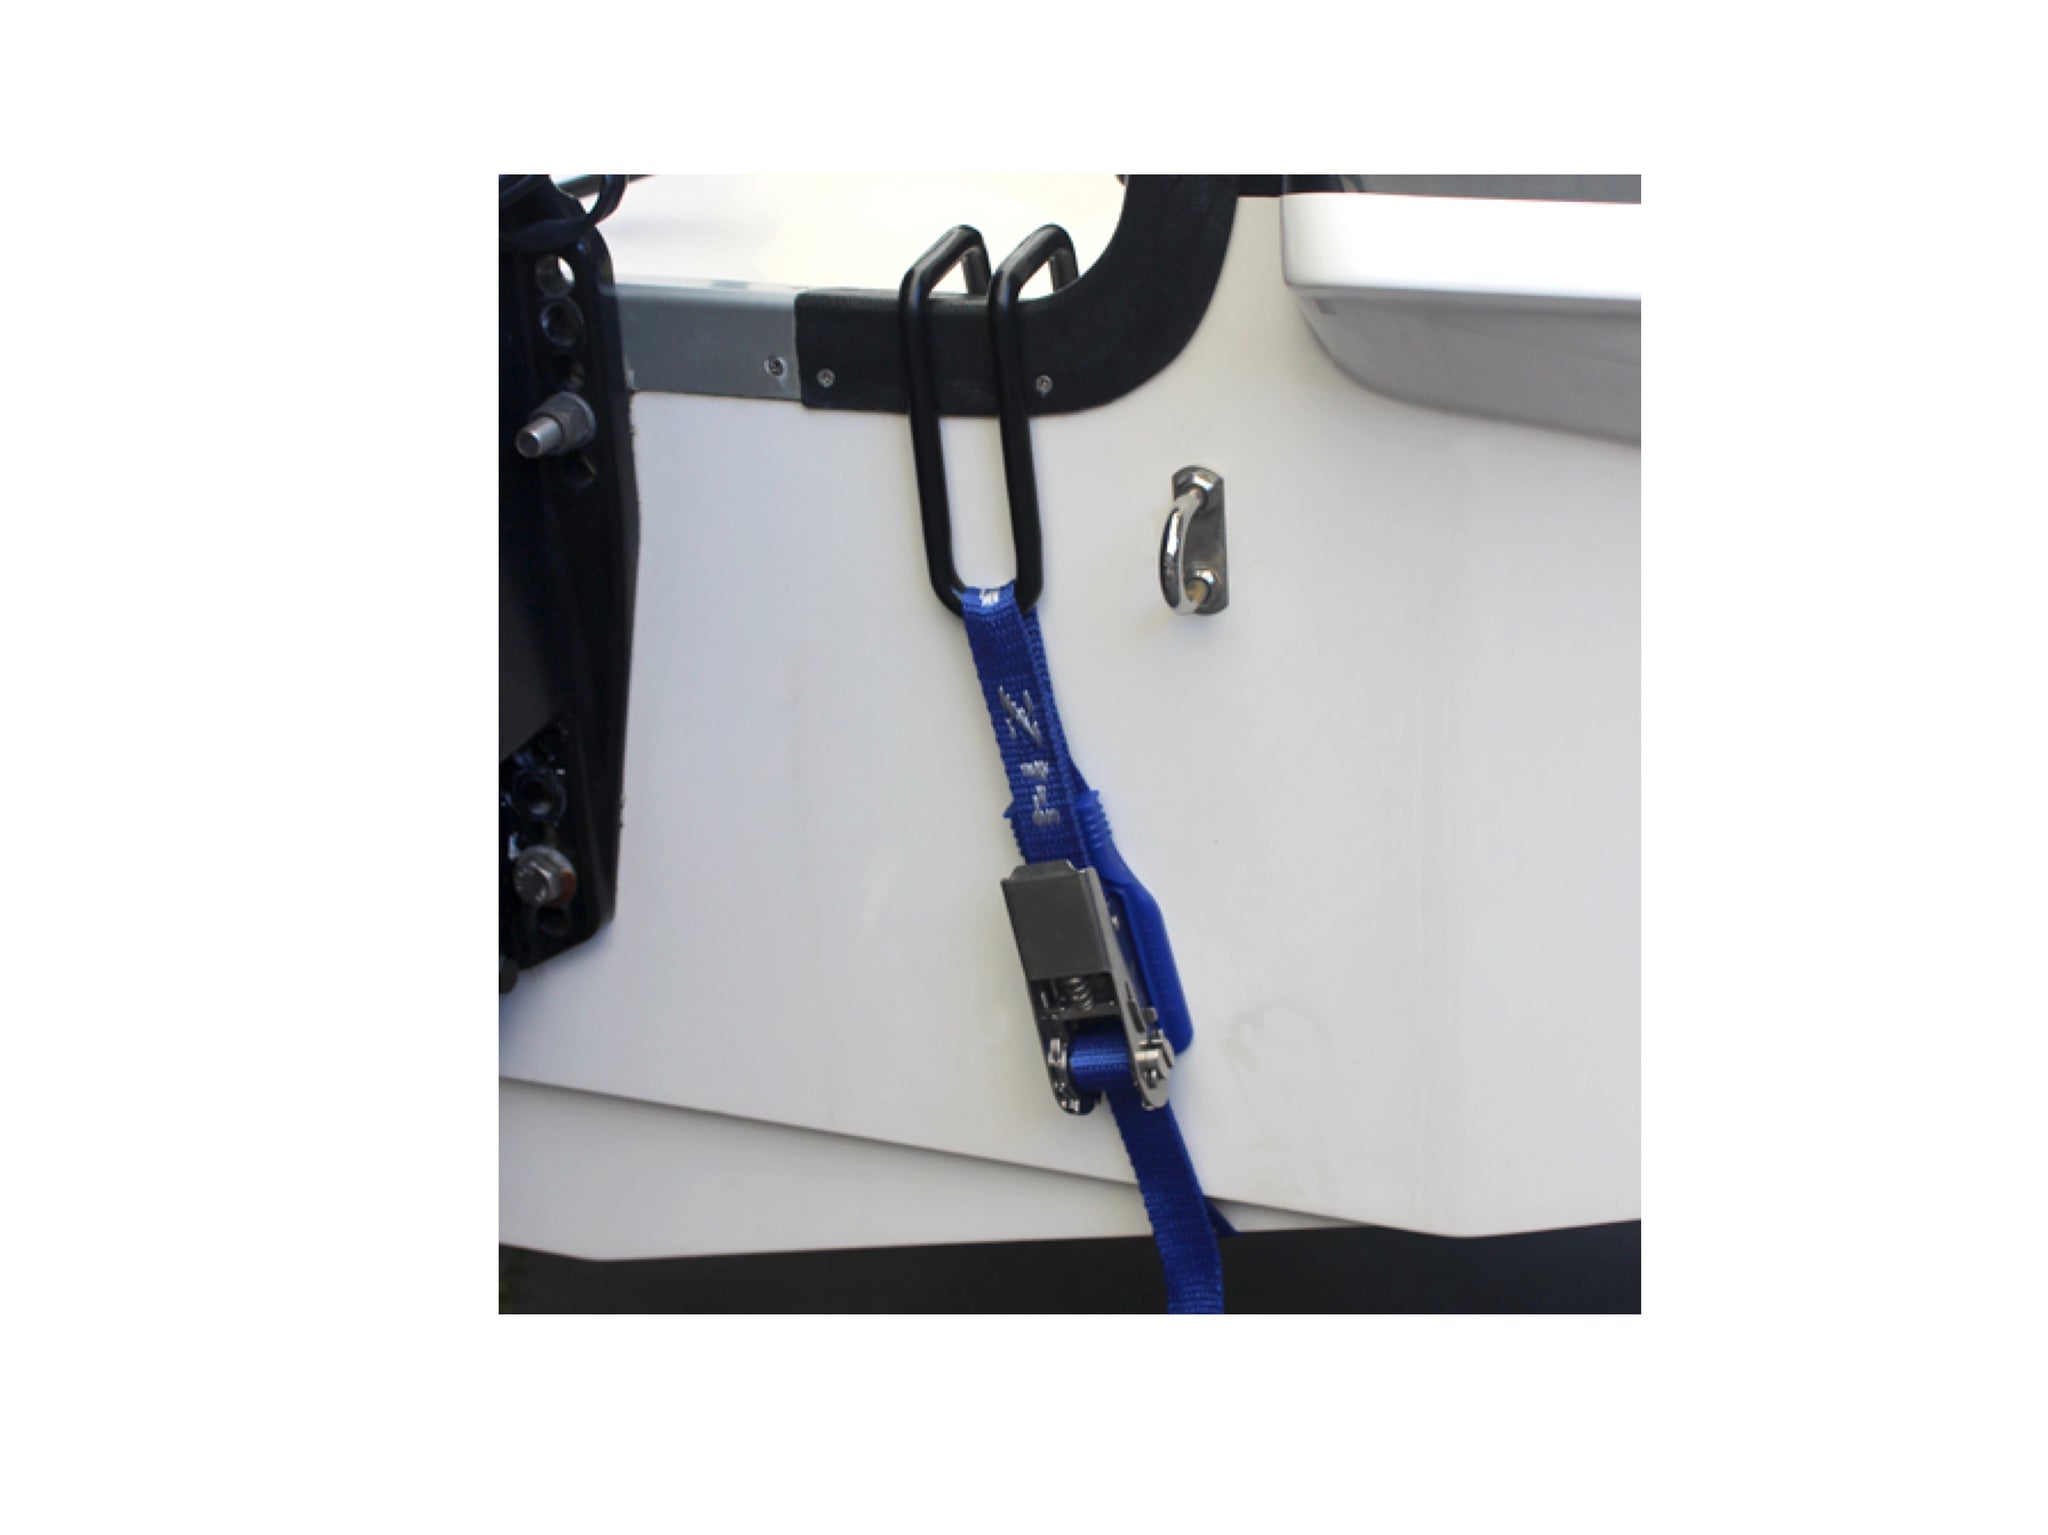 Transom Hook with Stainless Steel Ratchet Tiedown - The Cover Shop